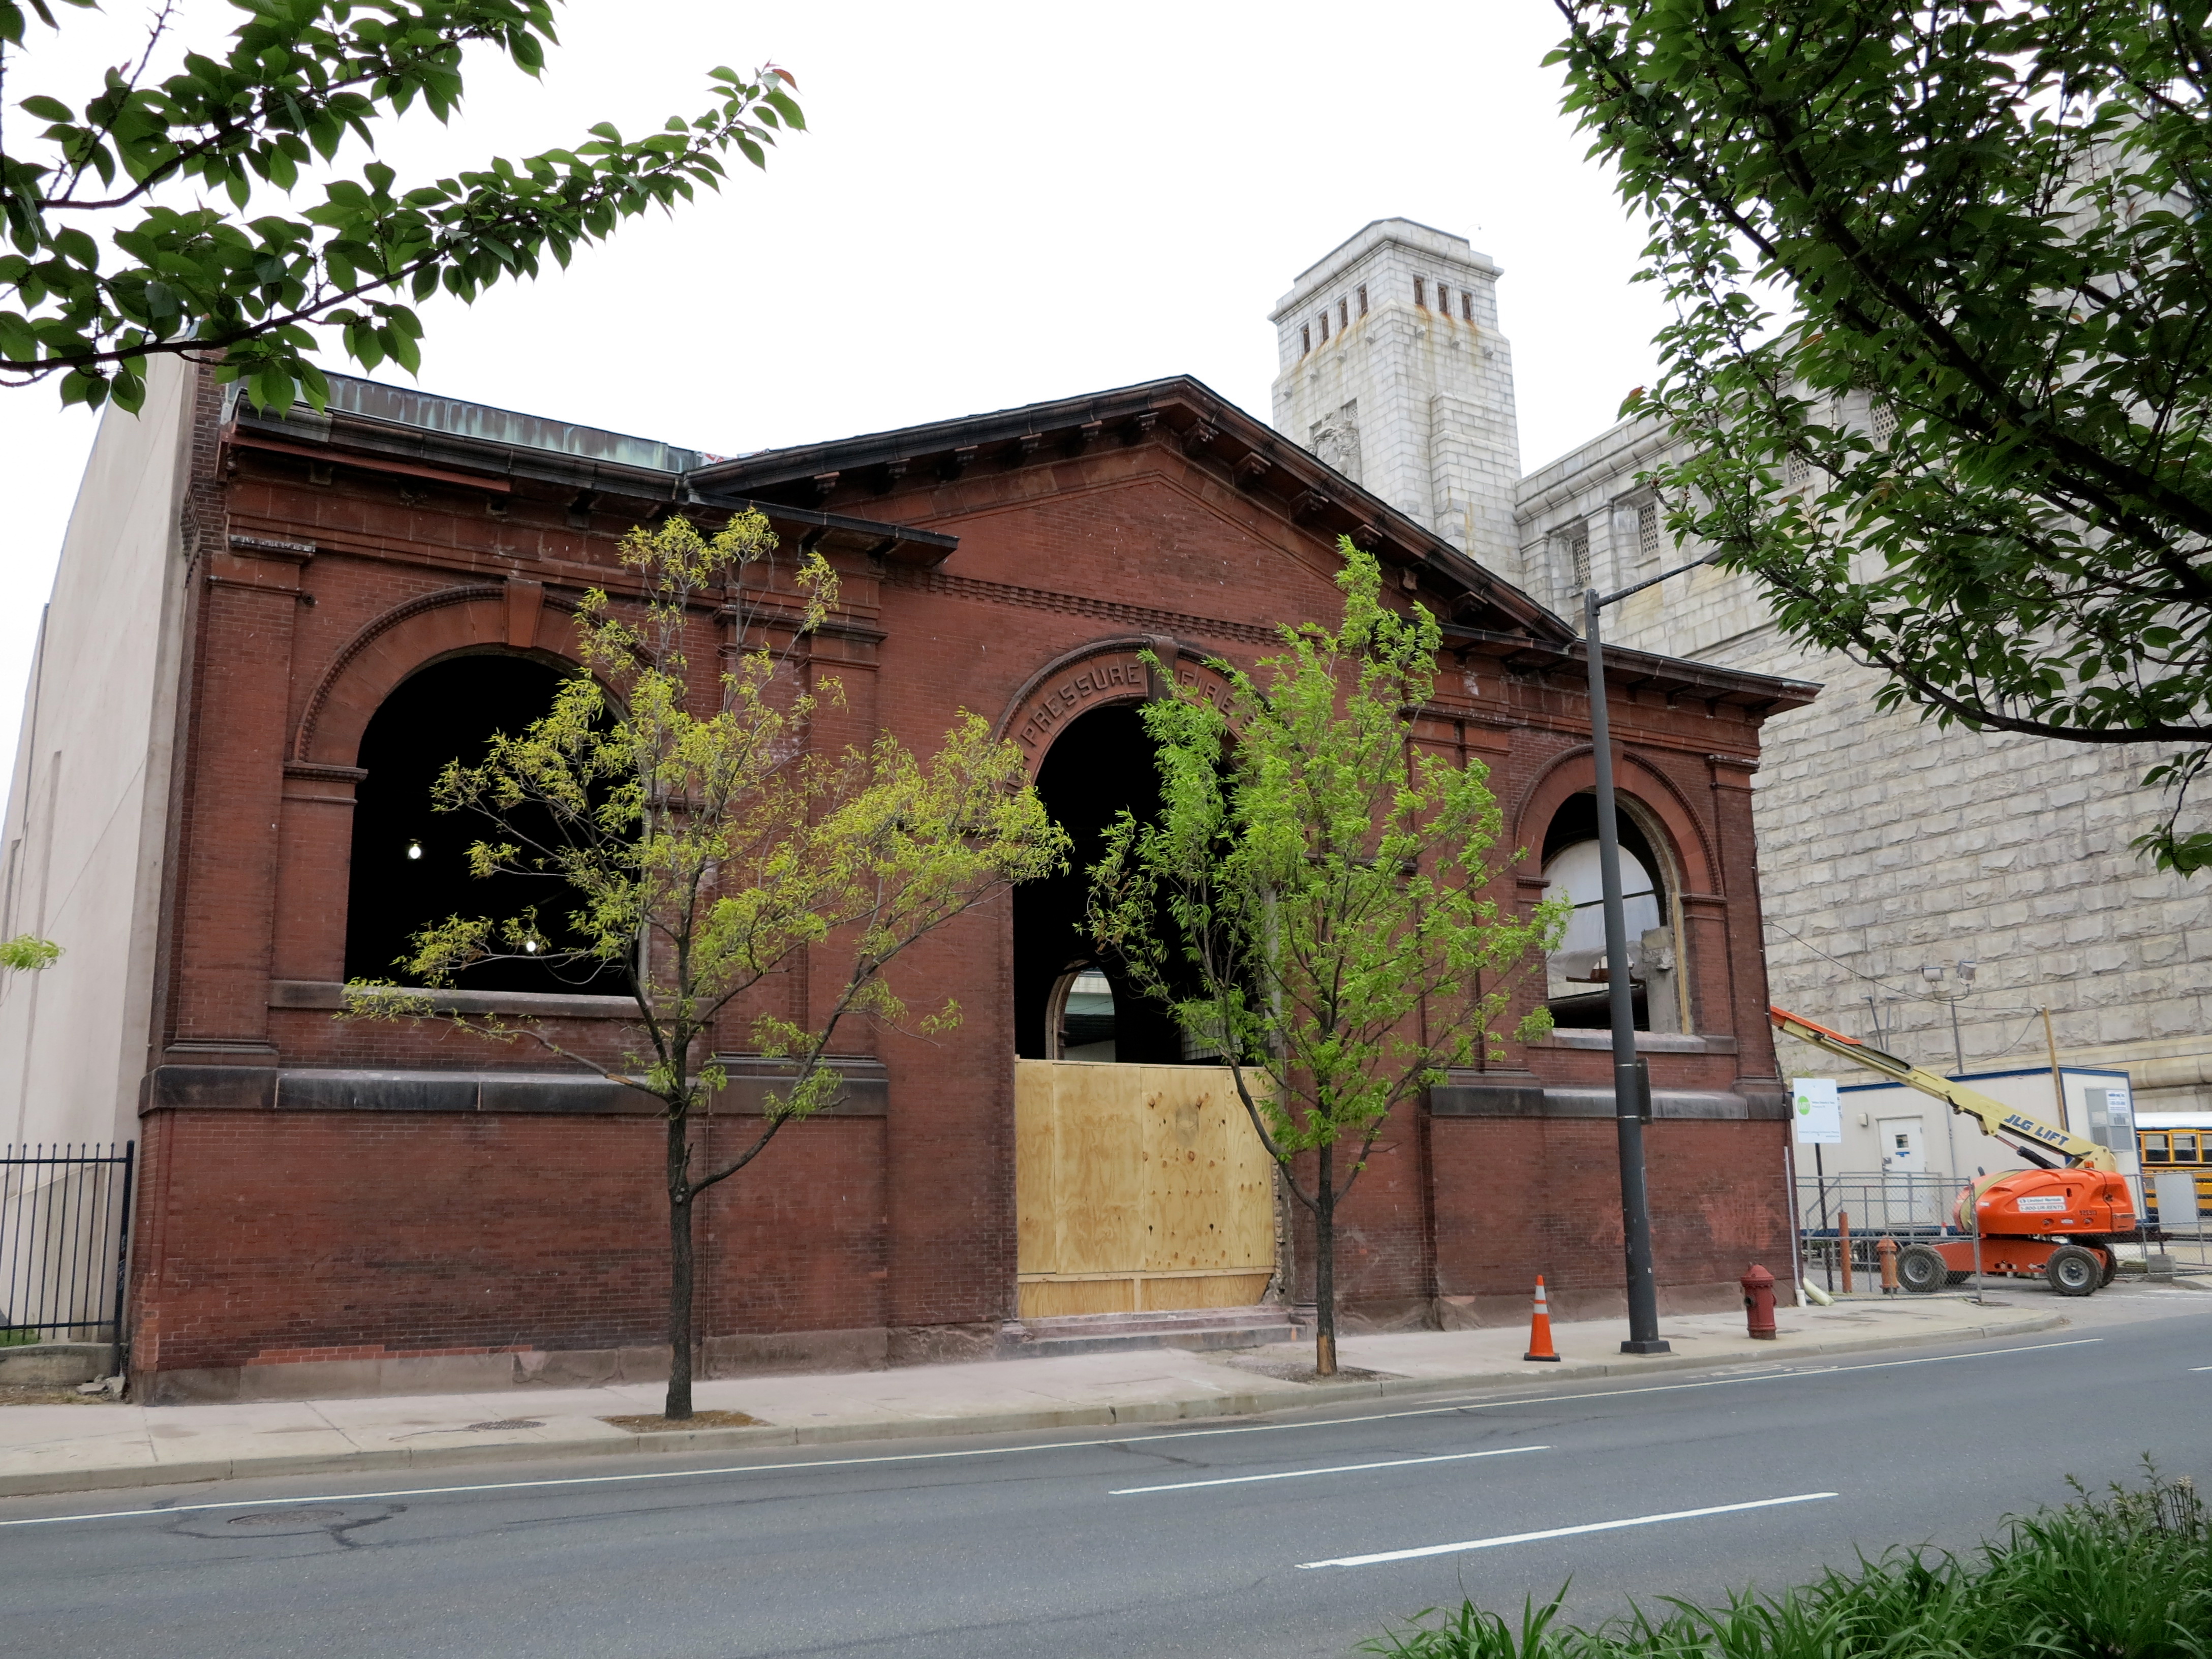 Future home of FringeArts, May 2013